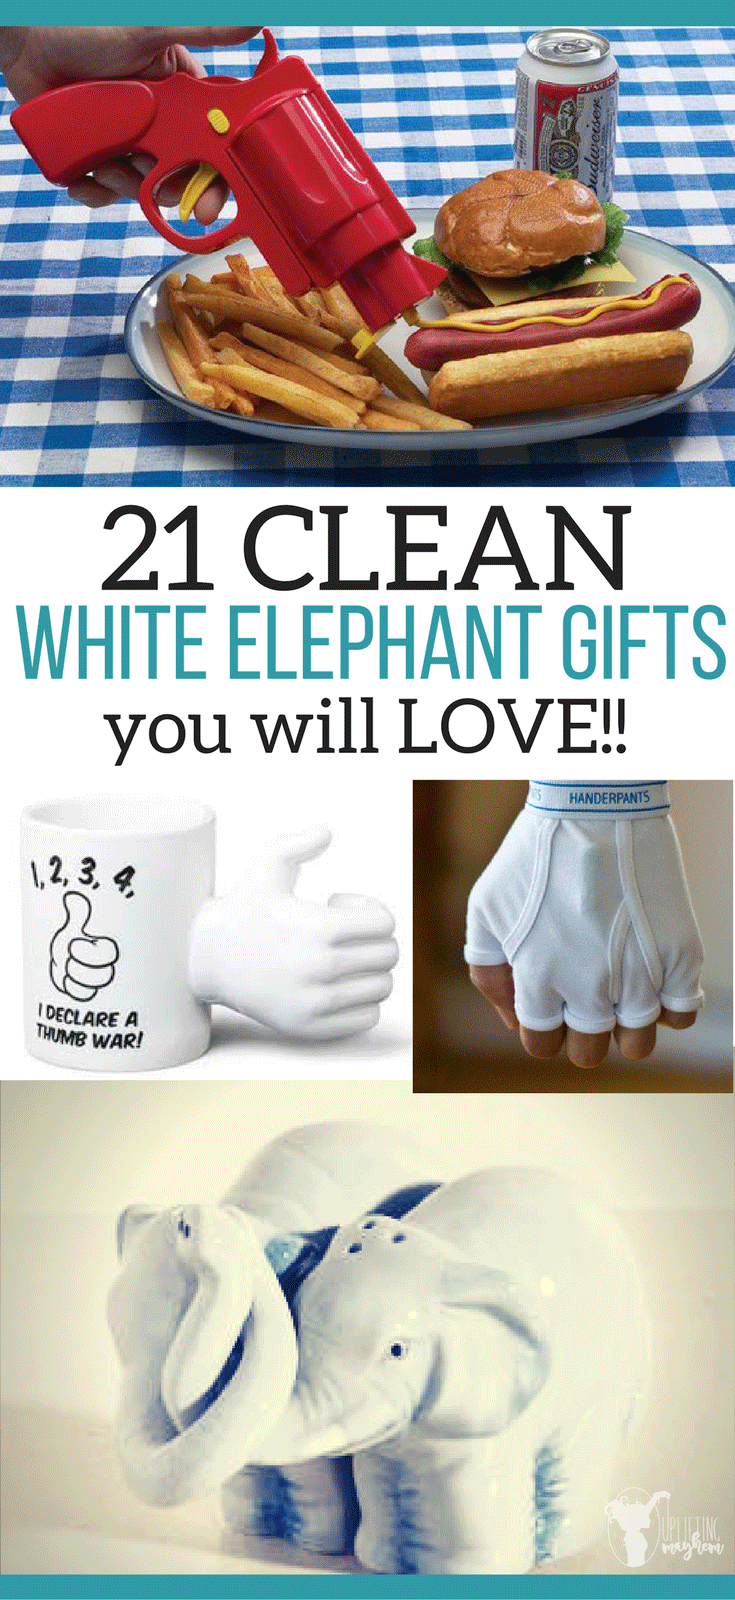 21 CLEAN White Elephant Gifts You Have to Try -   16 holiday Funny elephant gifts ideas